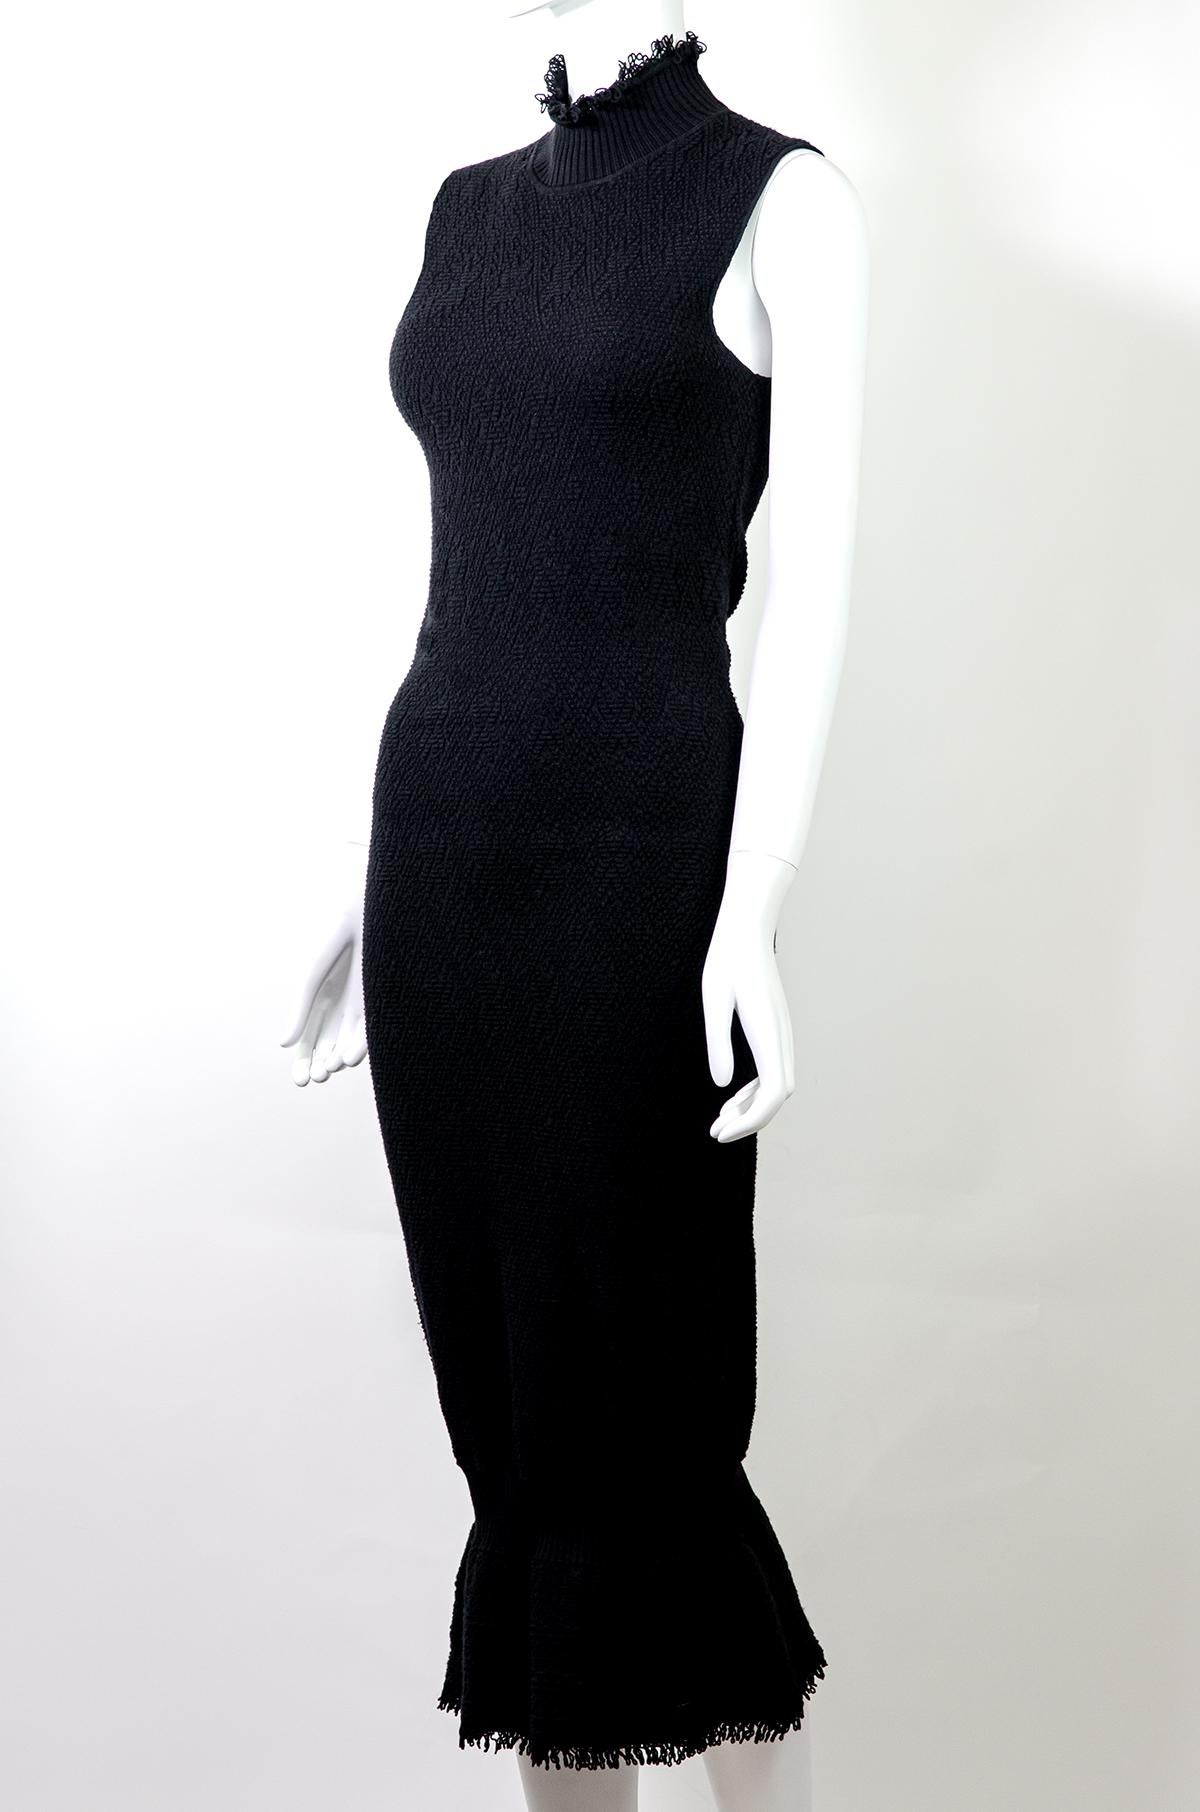 Dior by John Galliano Textured Knit Dress
Brand: Dior
Designer: John Galliano
Collection: Fall / Winter 1999
Fabric: 80% Wool / 15% Viscose / 5% Polyester
Color: Black
Size:  FR40

John Galliano’s creativity is unmatched. His designs for Dior and